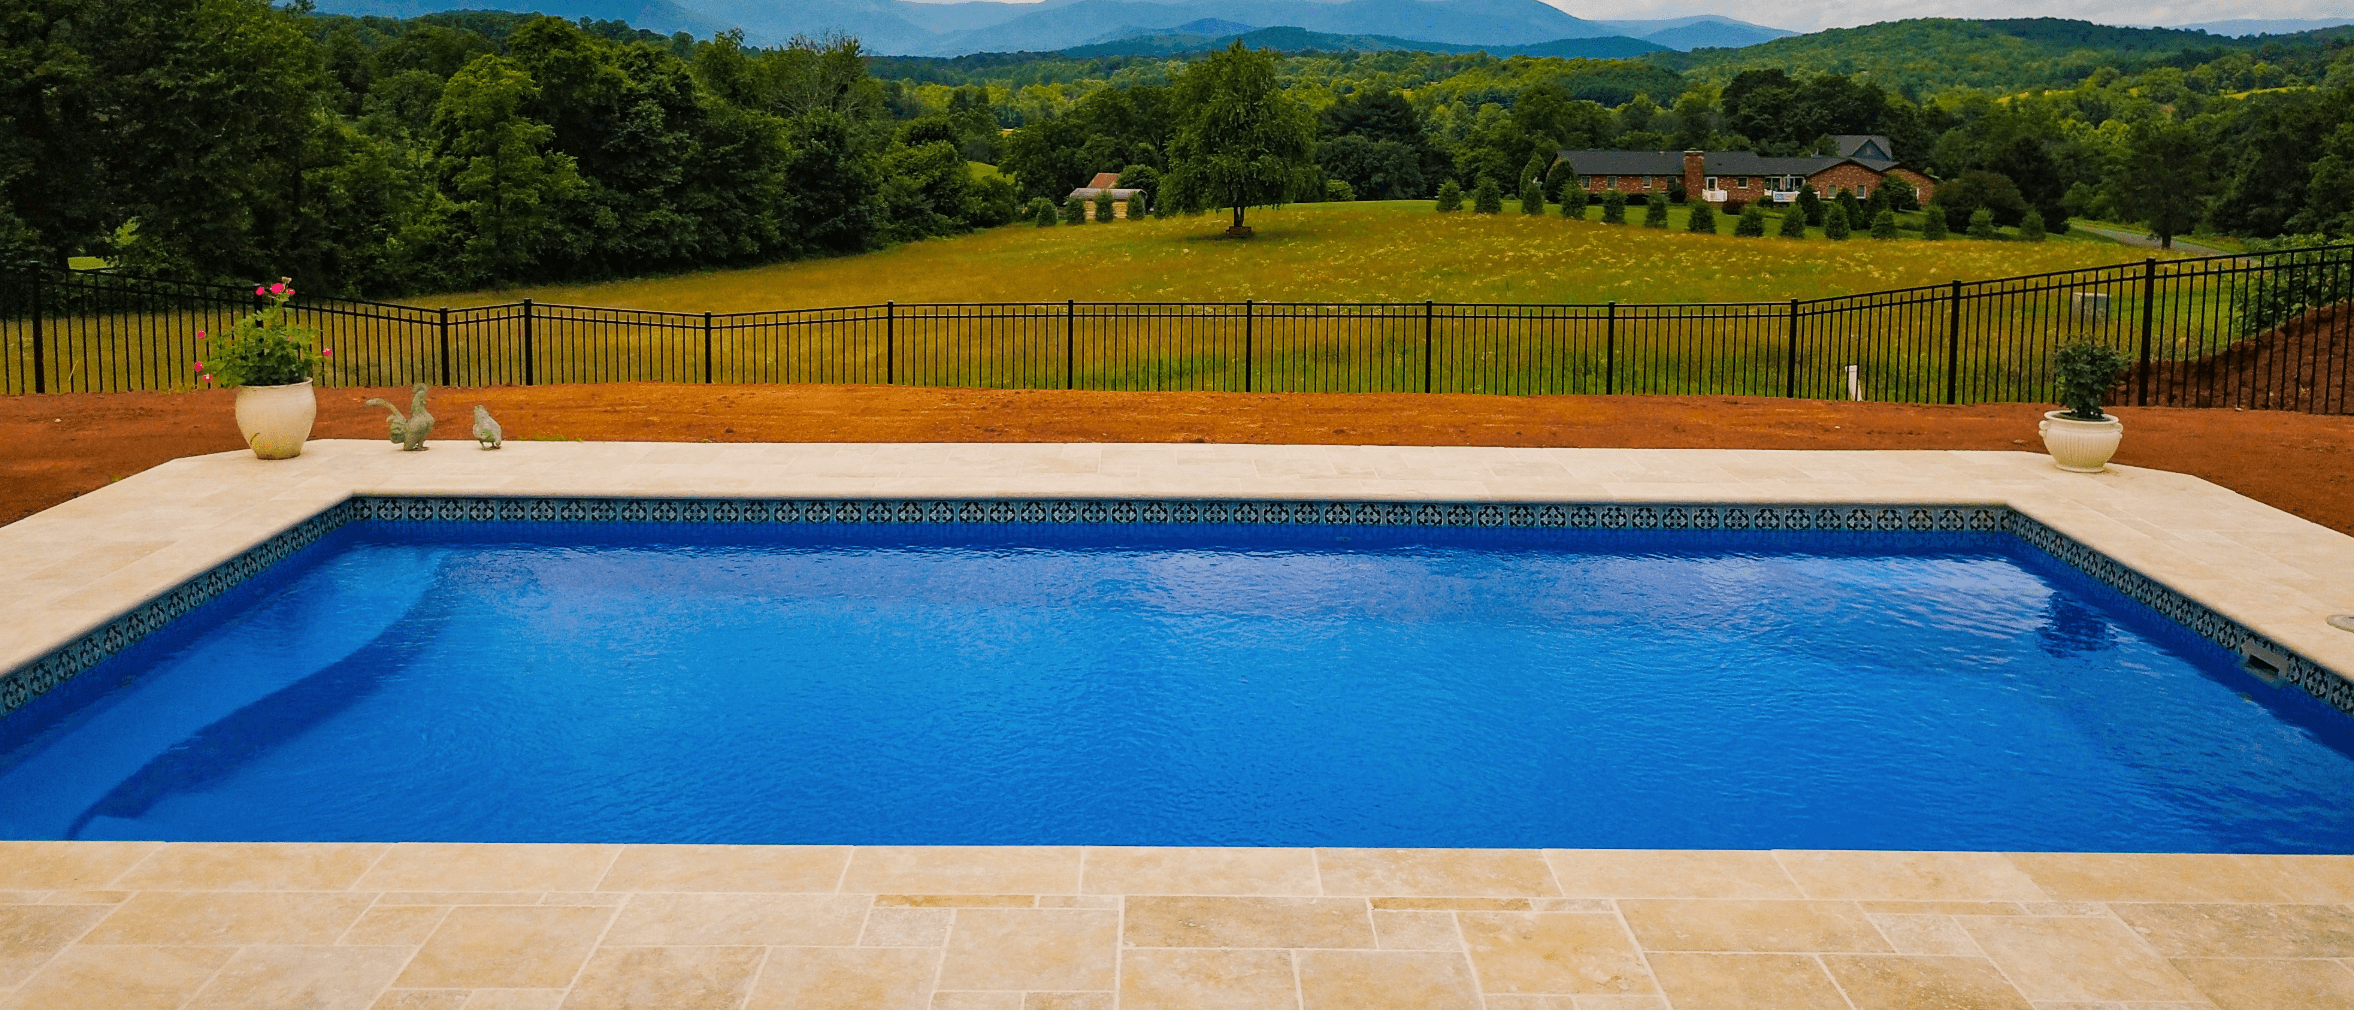 Fiberglass Inground Pool S, How Much Should I Expect To Pay For An Inground Pool